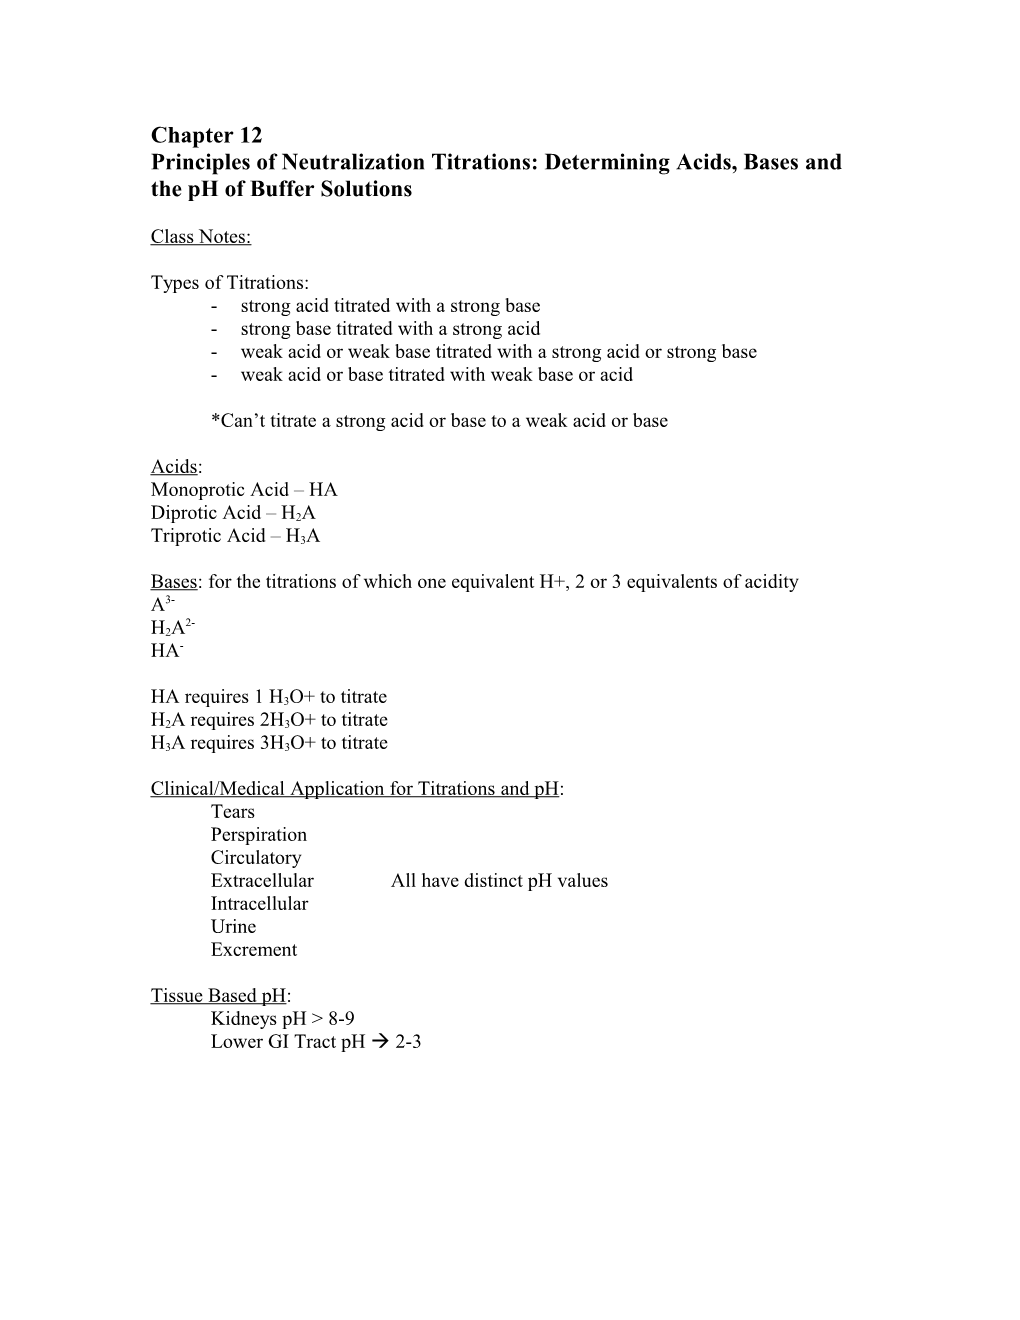 Principles of Neutralization Titrations: Determining Acids, Bases and the Ph of Buffer